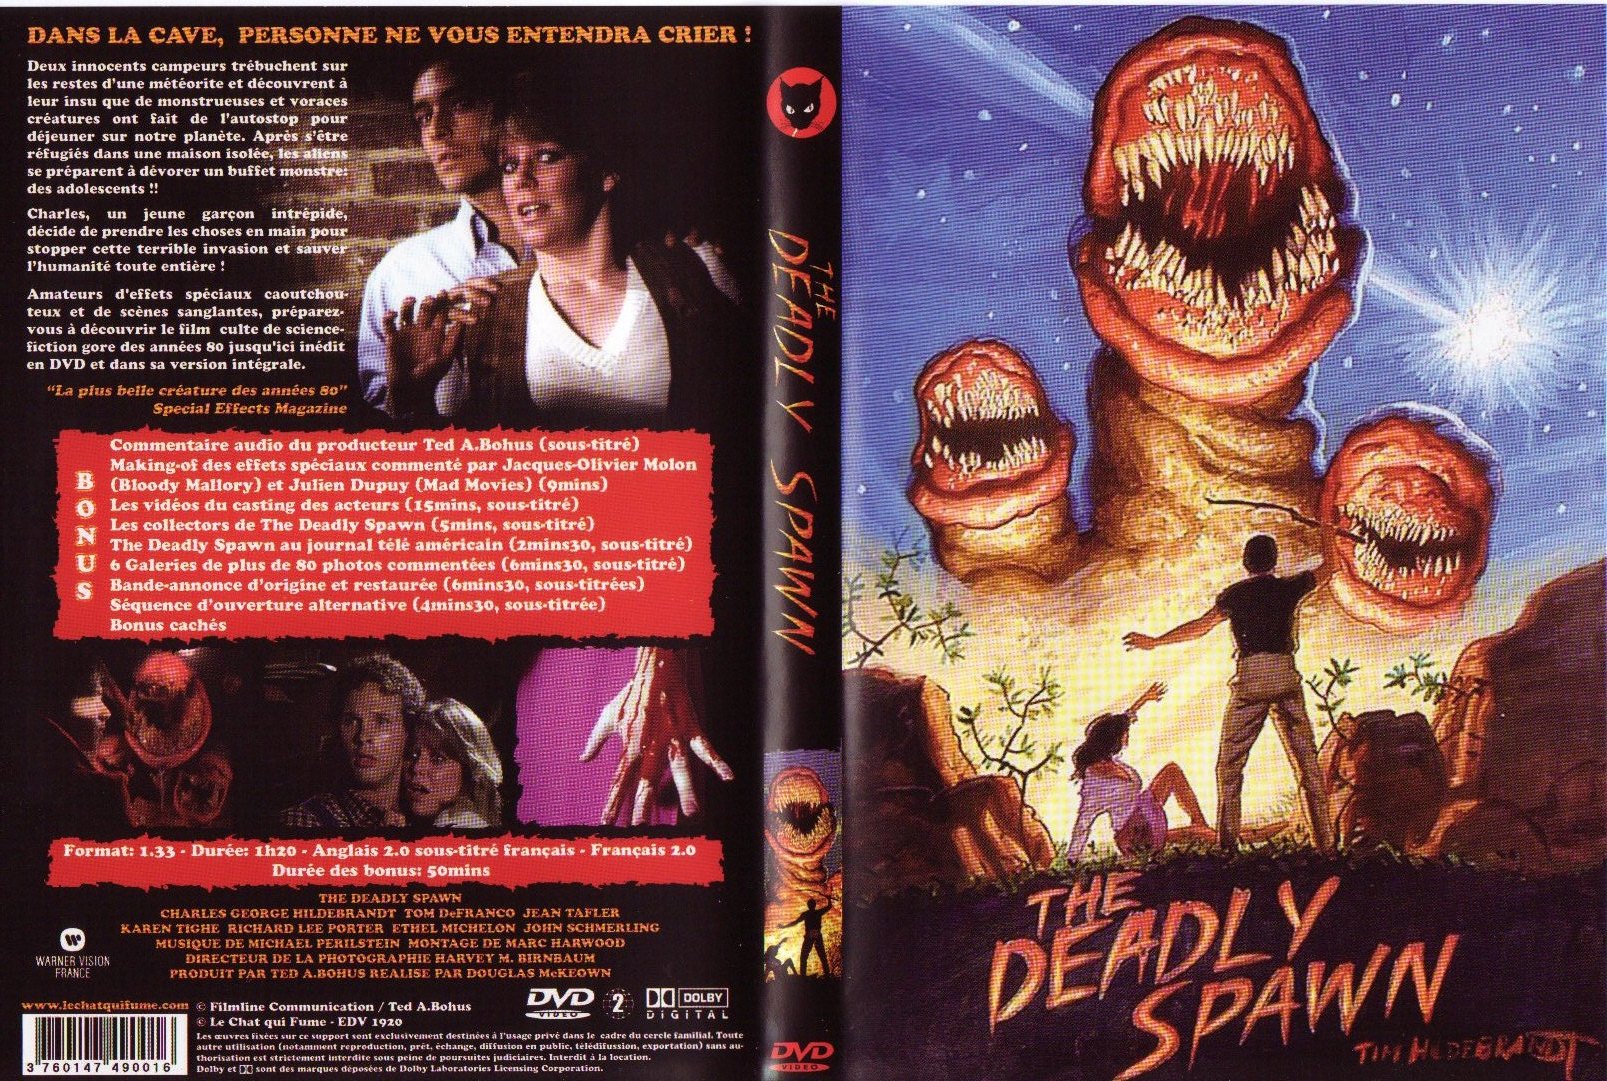 Jaquette DVD The deadly spawn